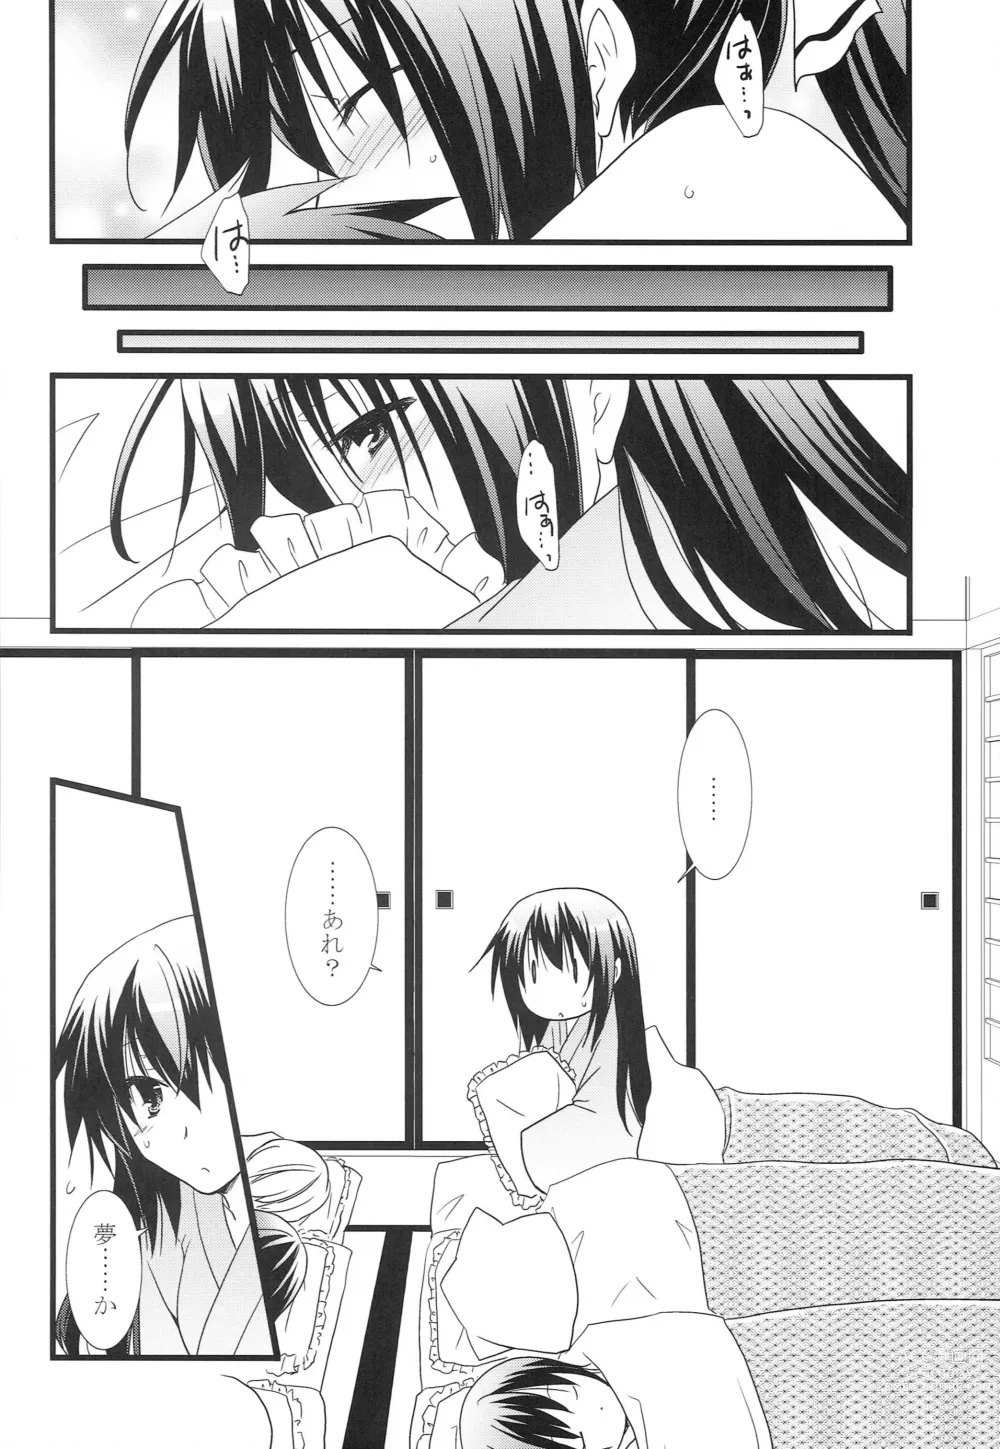 Page 29 of doujinshi Summer Dream